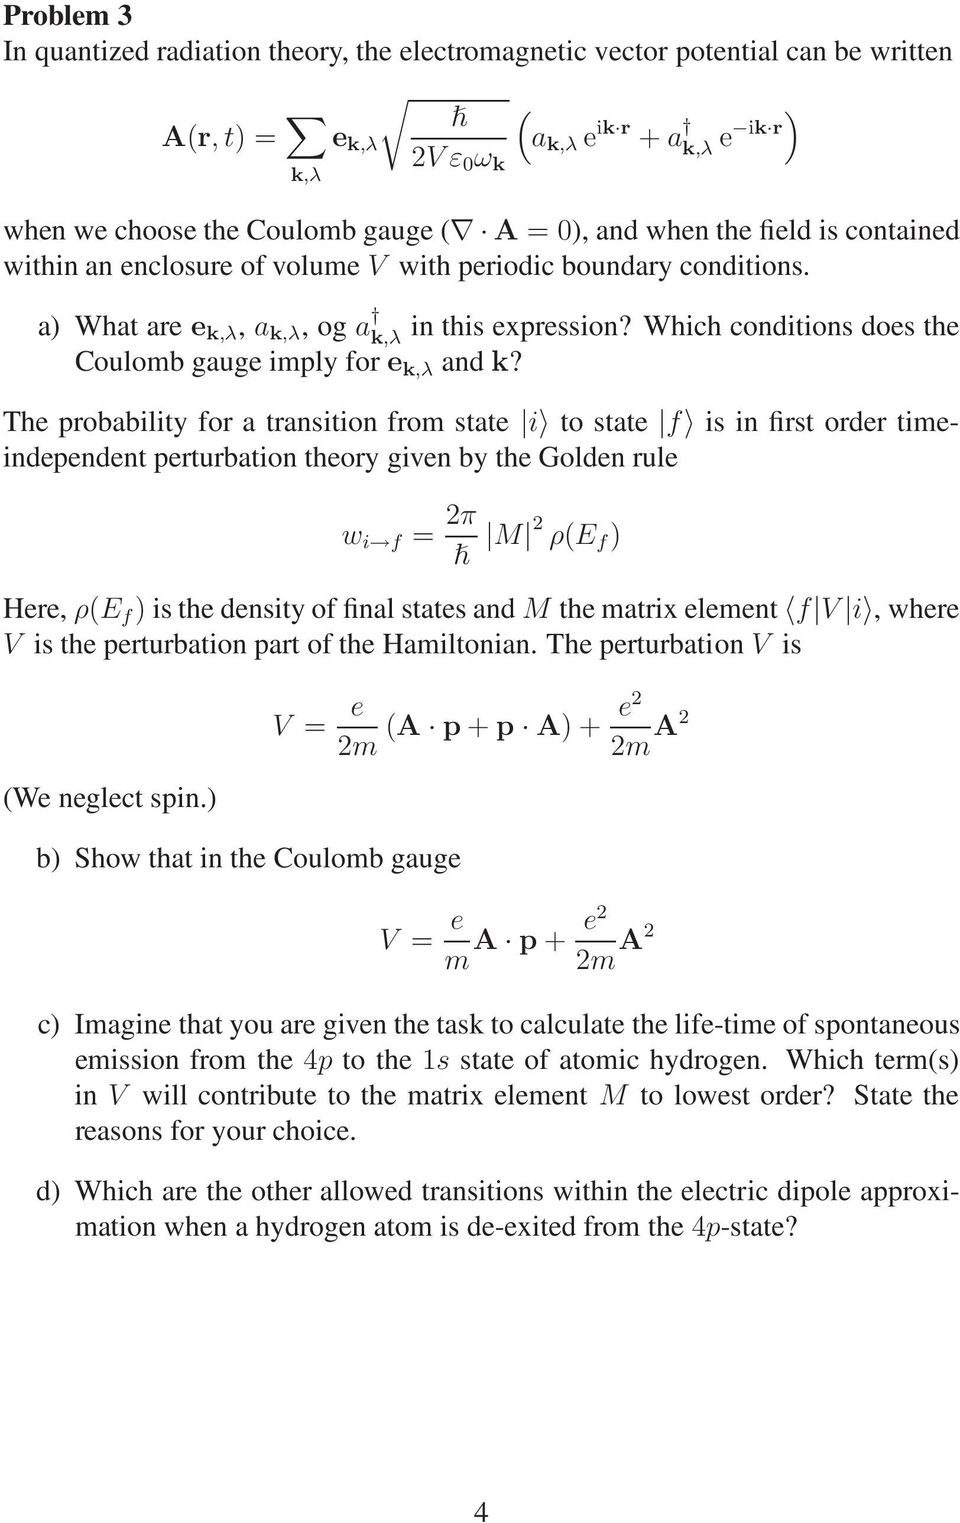 Which conditions does the Coulomb gauge imply for e k,λ and k?